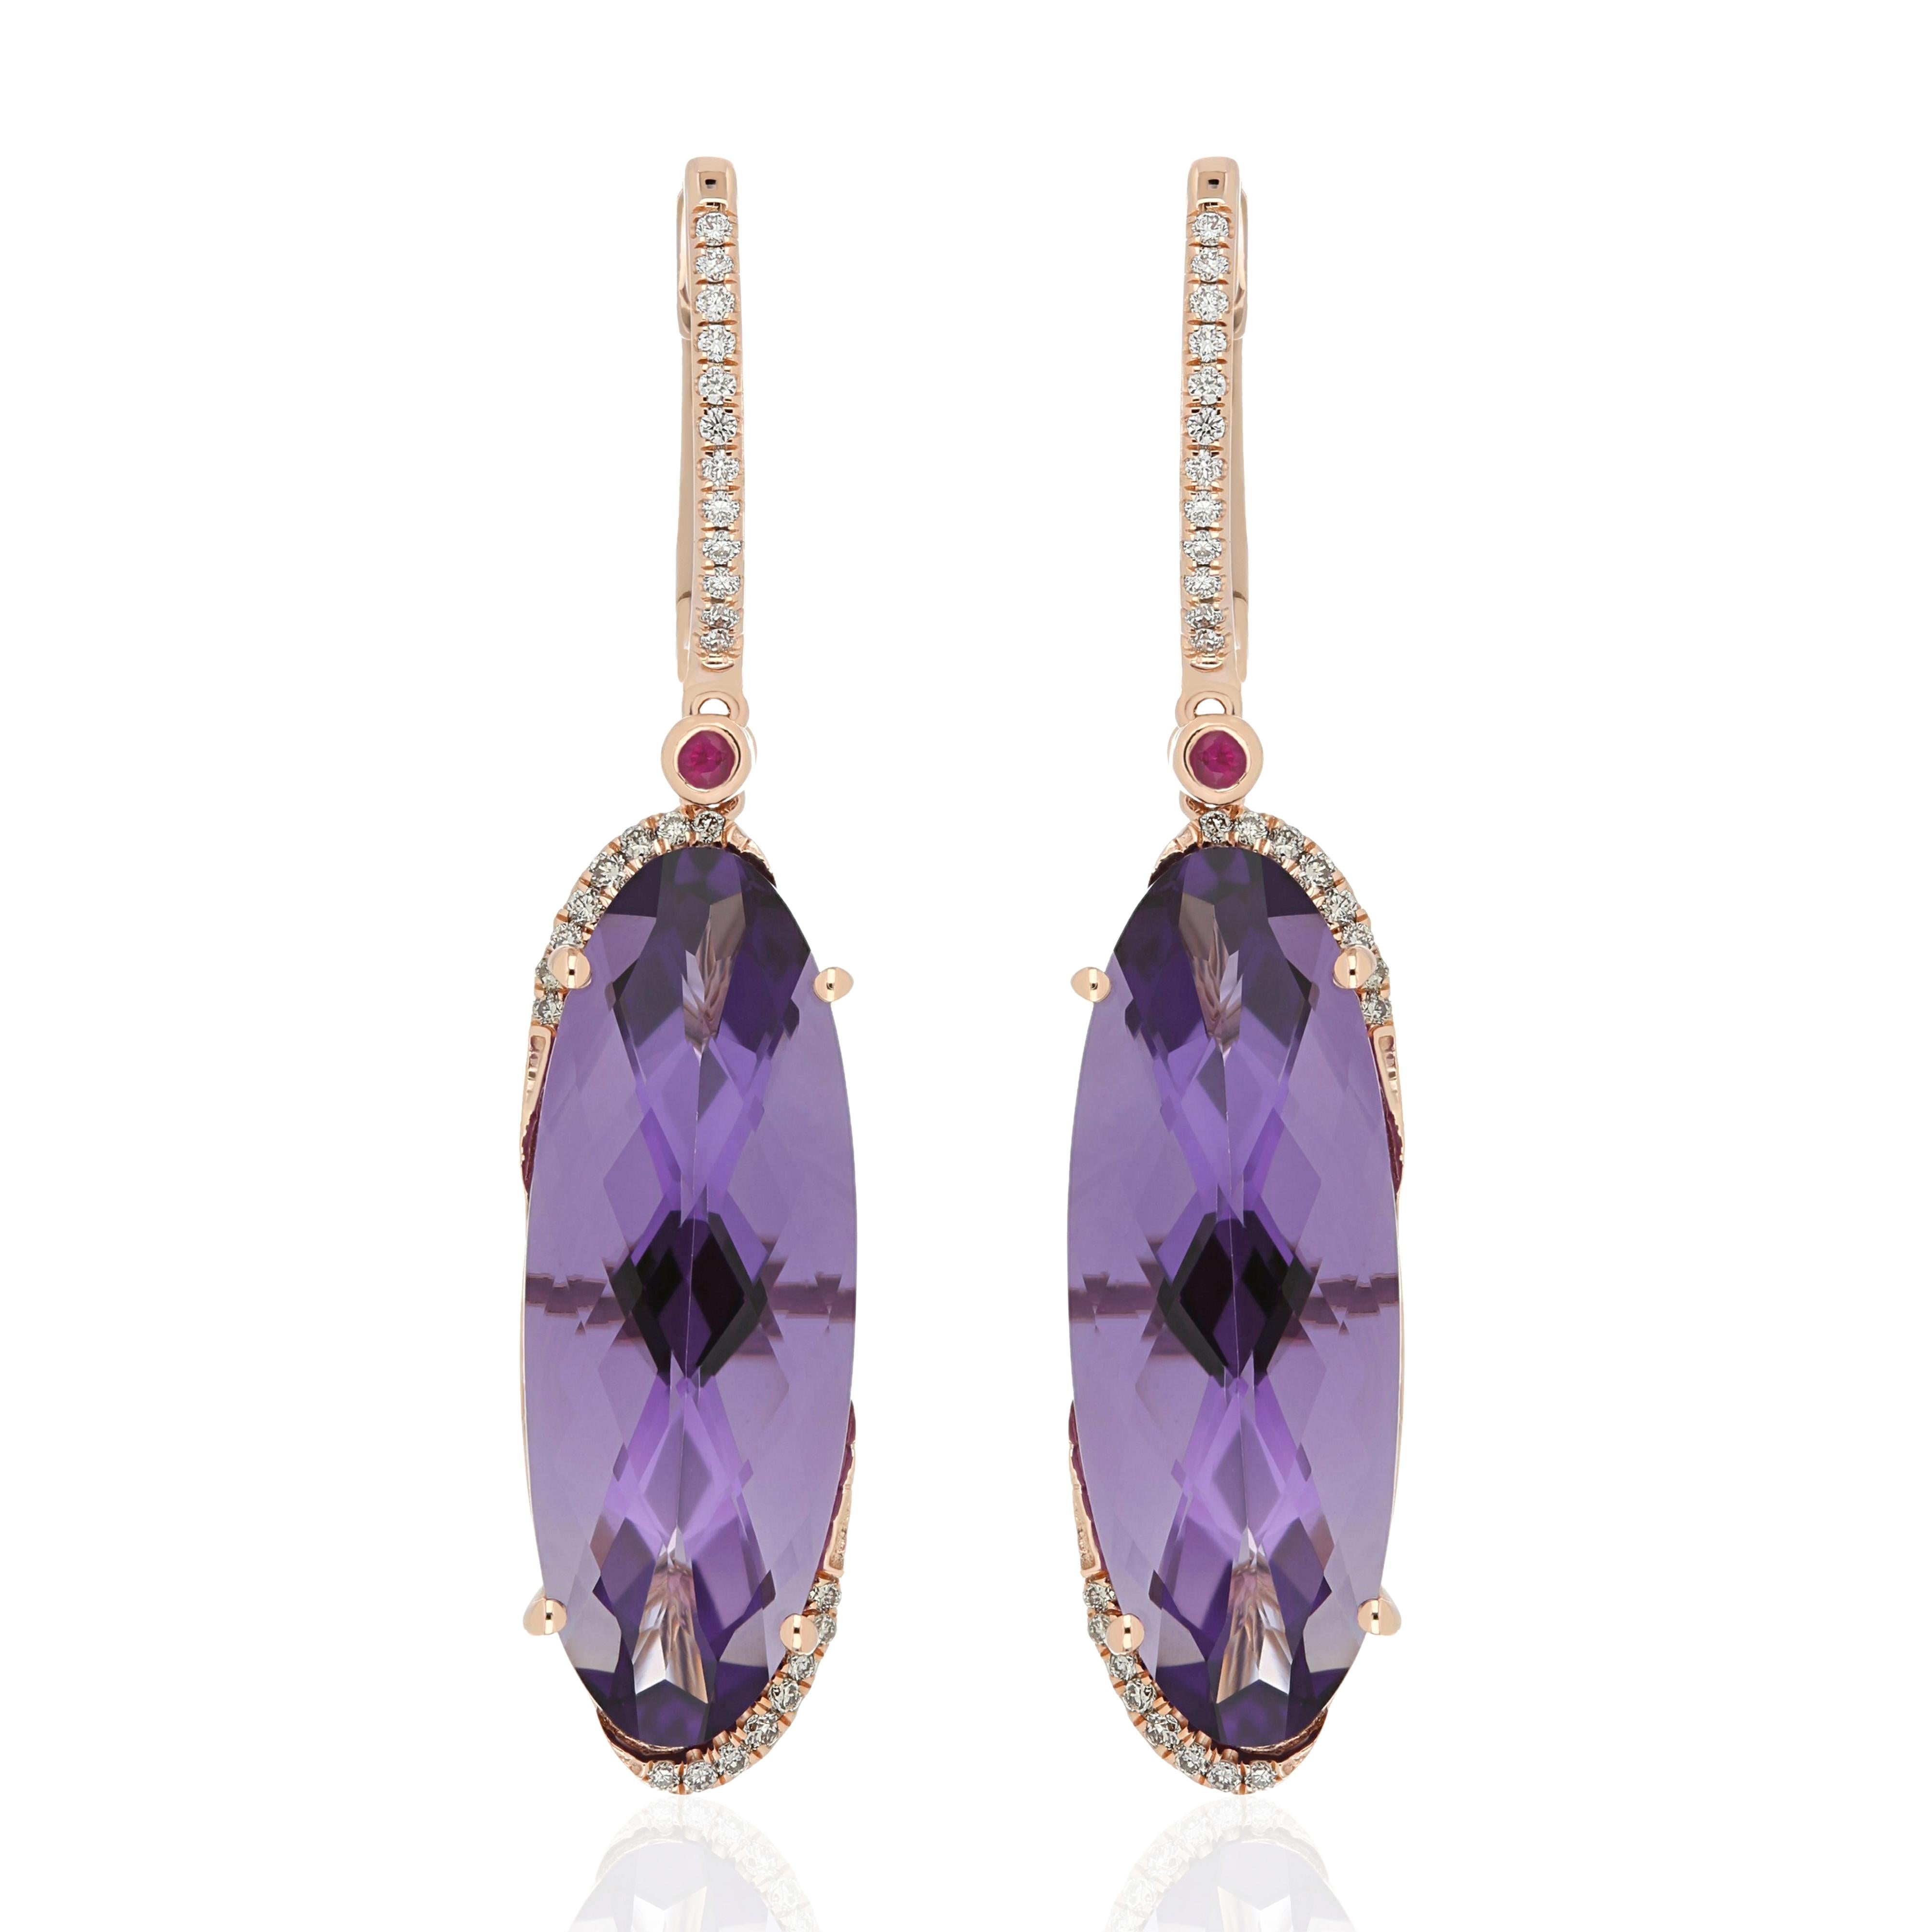 Elegant and exquisitely detailed 14 Karat Yellow Gold Earring, center set with 19.80Cts .Oval Shape Amethyst , accented with 0.06Cts Ruby and micro pave set Diamonds, weighing approx. 0.19 Cts Beautifully Hand crafted in 14 Karat Yellow Gold.

Stone